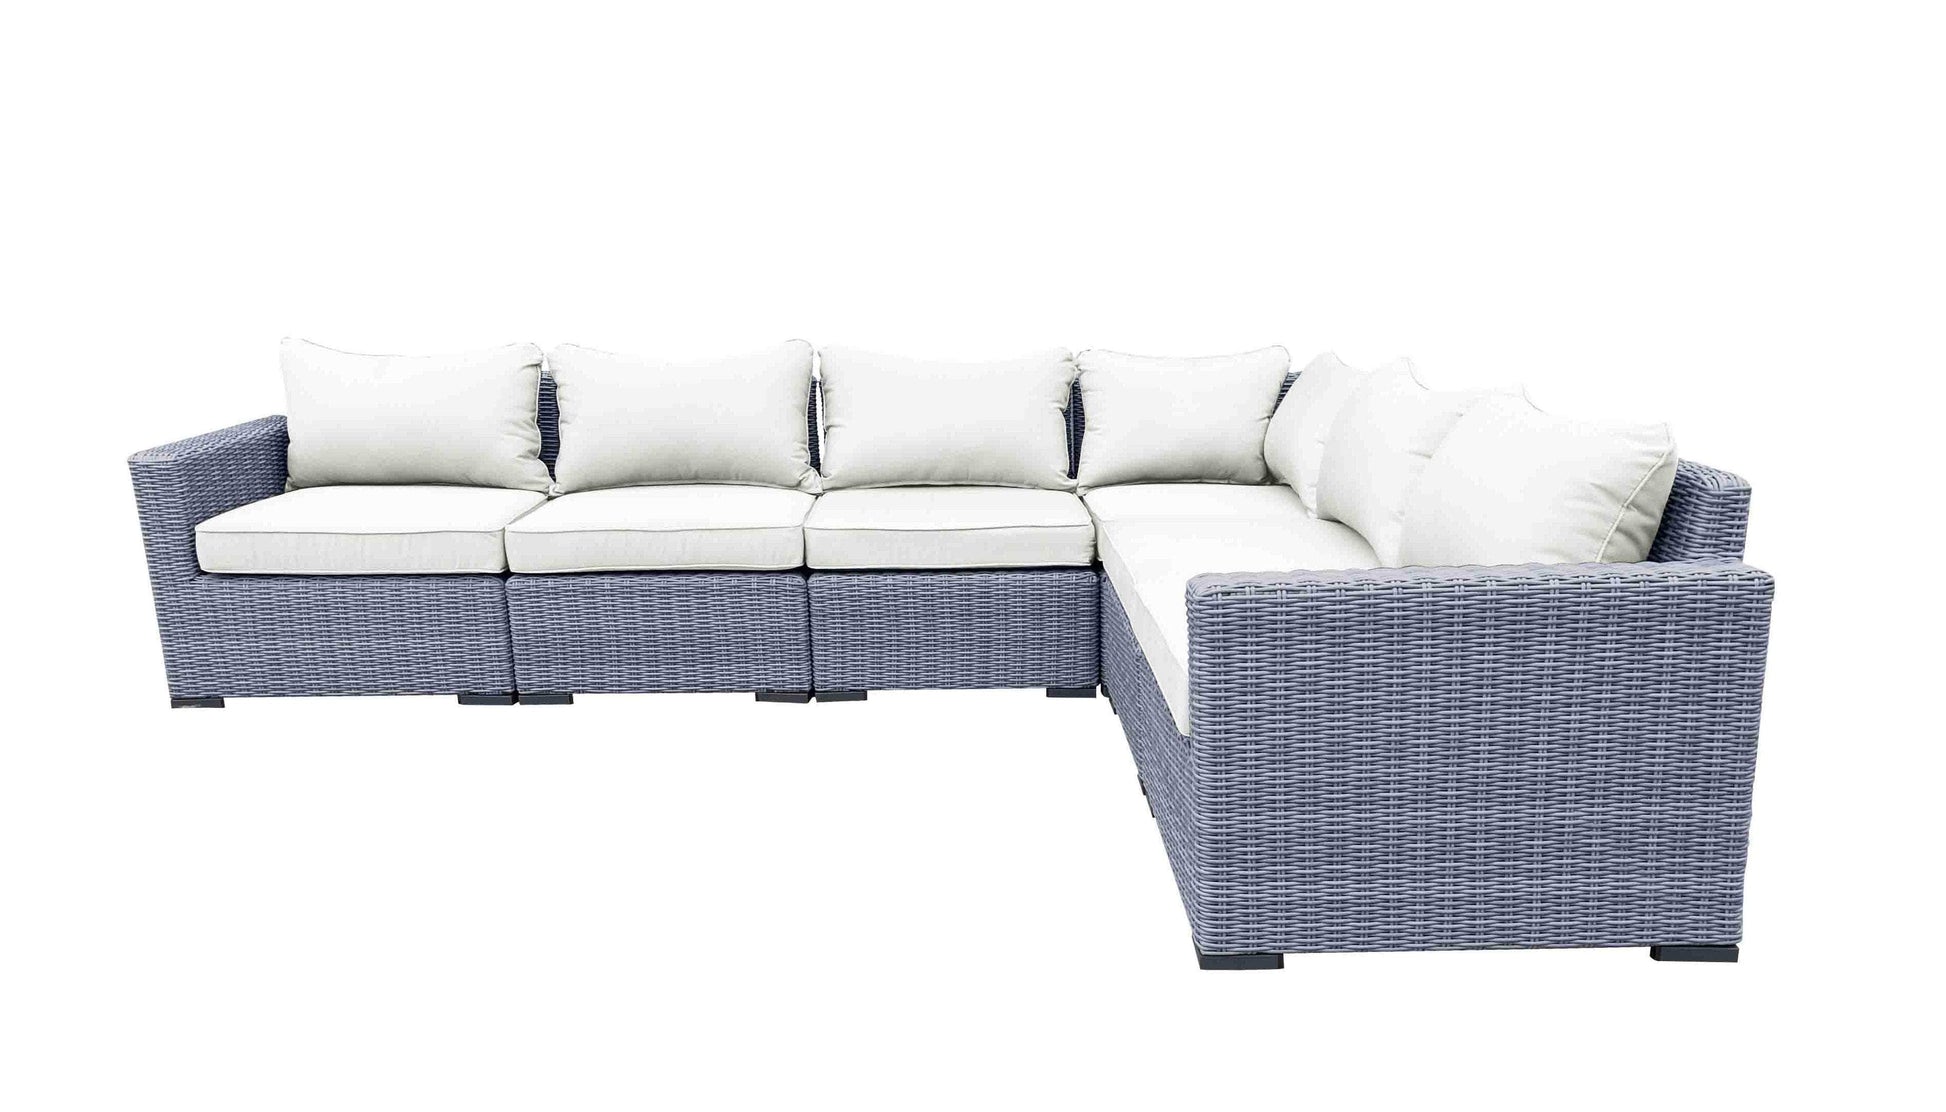 CIEUX Sectional Canvas Natural Cannes Outdoor Patio Wicker Modular L-Shaped Sectional Sofa in Grey with Sunbrella Cushions - Available in 2 Colours